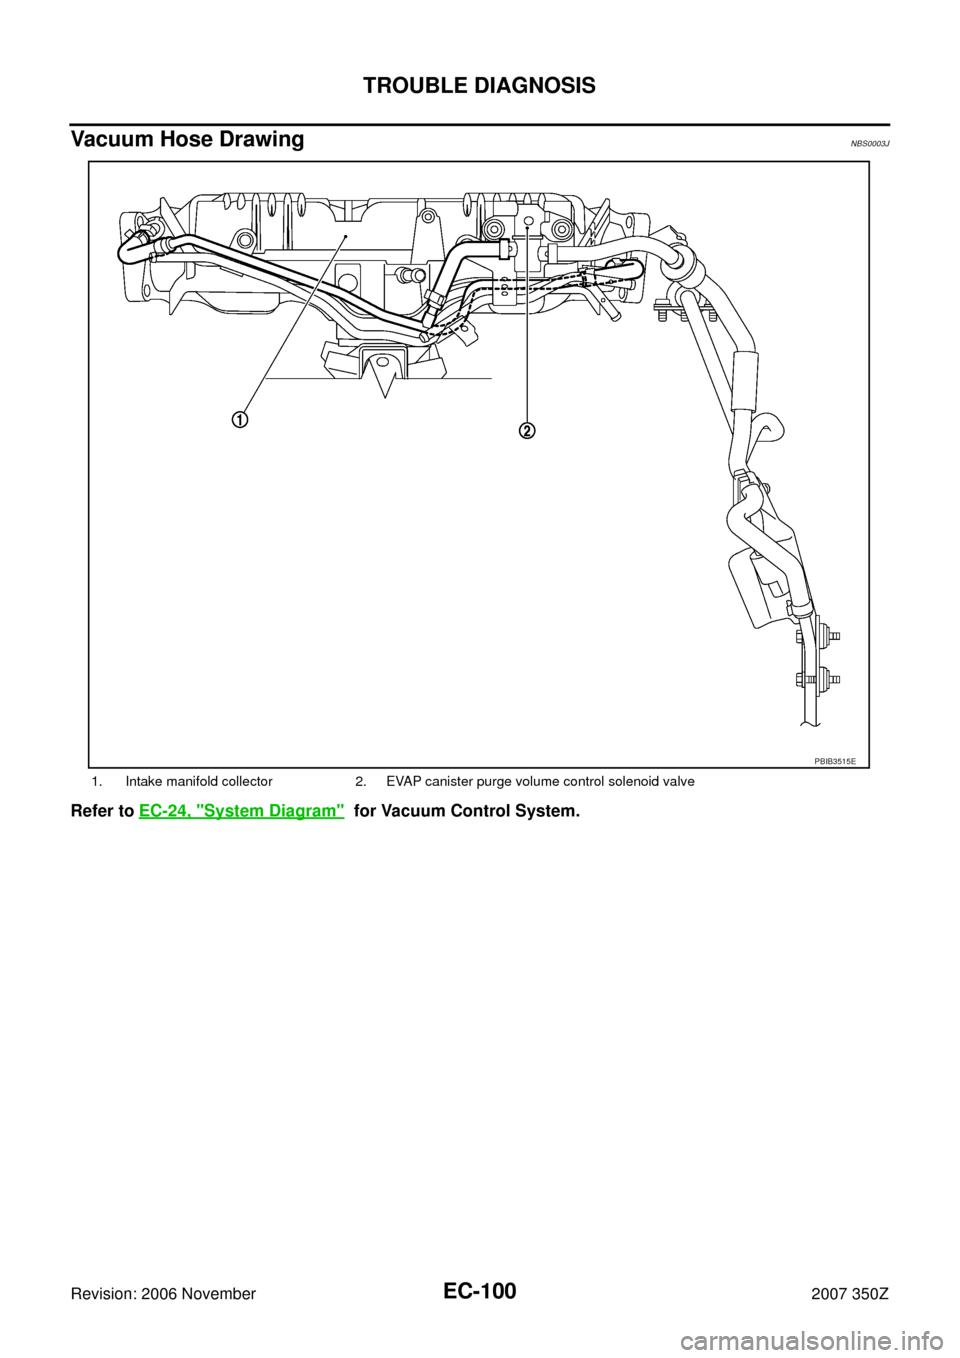 NISSAN 350Z 2007 Z33 Engine Control Owners Manual EC-100
TROUBLE DIAGNOSIS
Revision: 2006 November2007 350Z
Vacuum Hose DrawingNBS0003J
Refer to EC-24, "System Diagram"  for Vacuum Control System.
1. Intake manifold collector 2. EVAP canister purge v